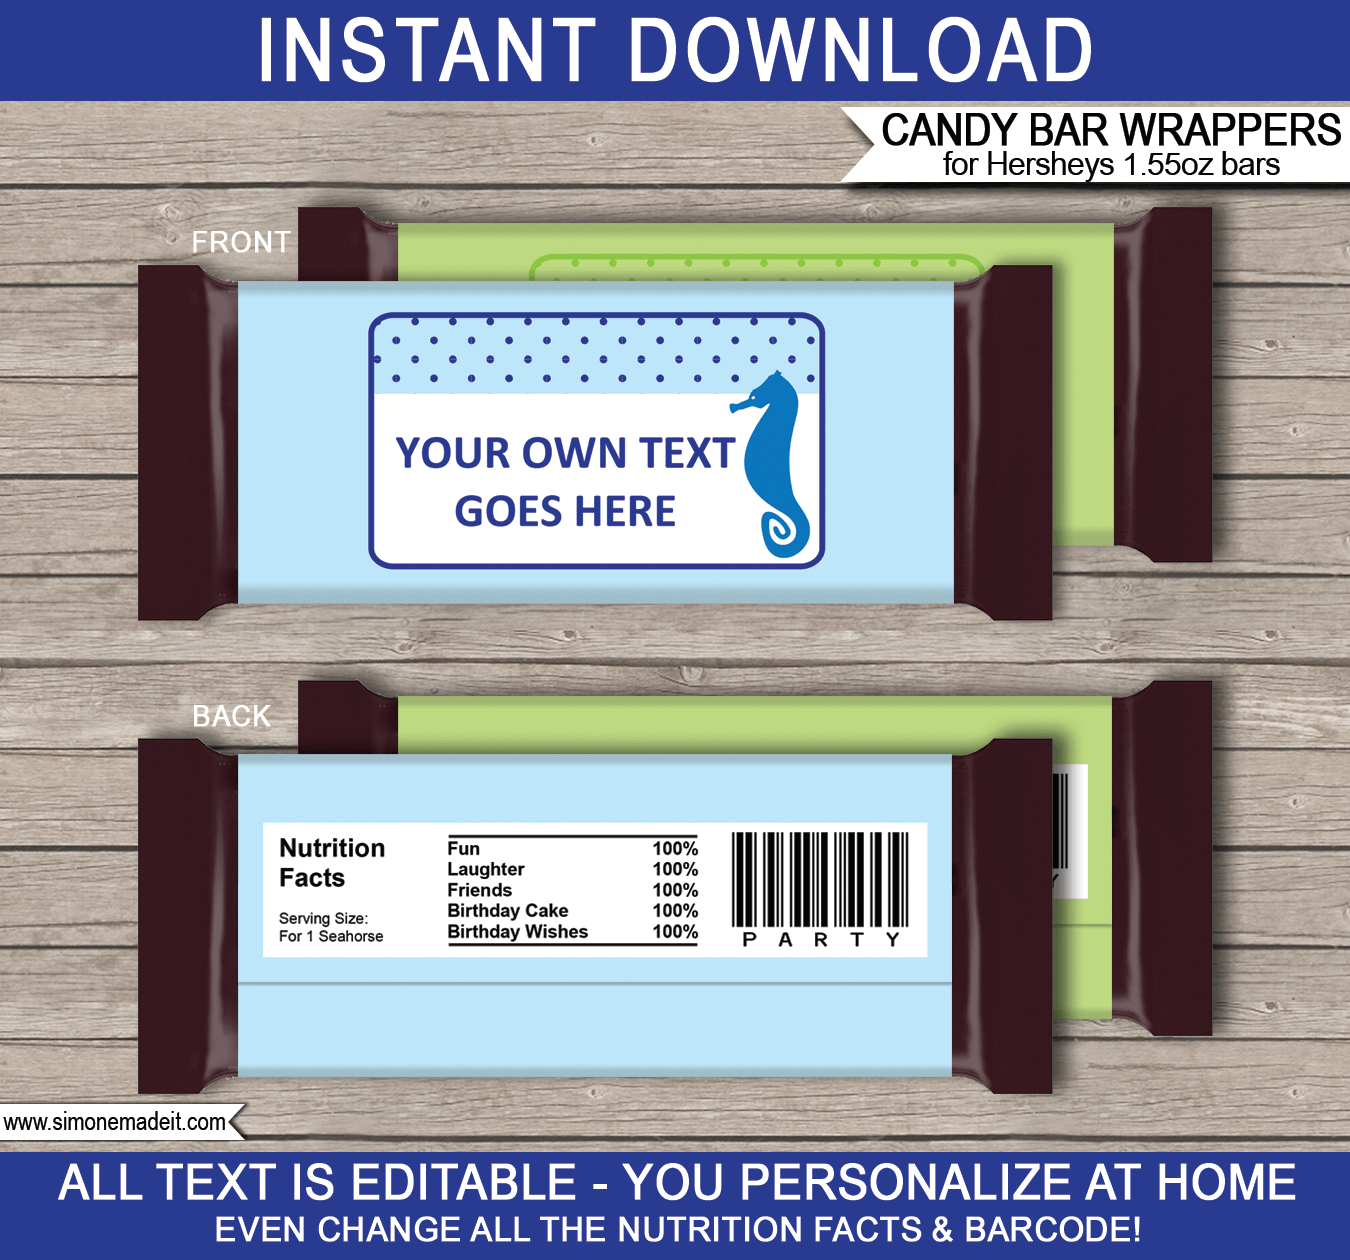 Under the Sea Hershey Candy Bar Wrappers | Birthday Party Favors | Personalized Candy Bars | Editable Template | INSTANT DOWNLOAD $3.00 via simonemadeit.com